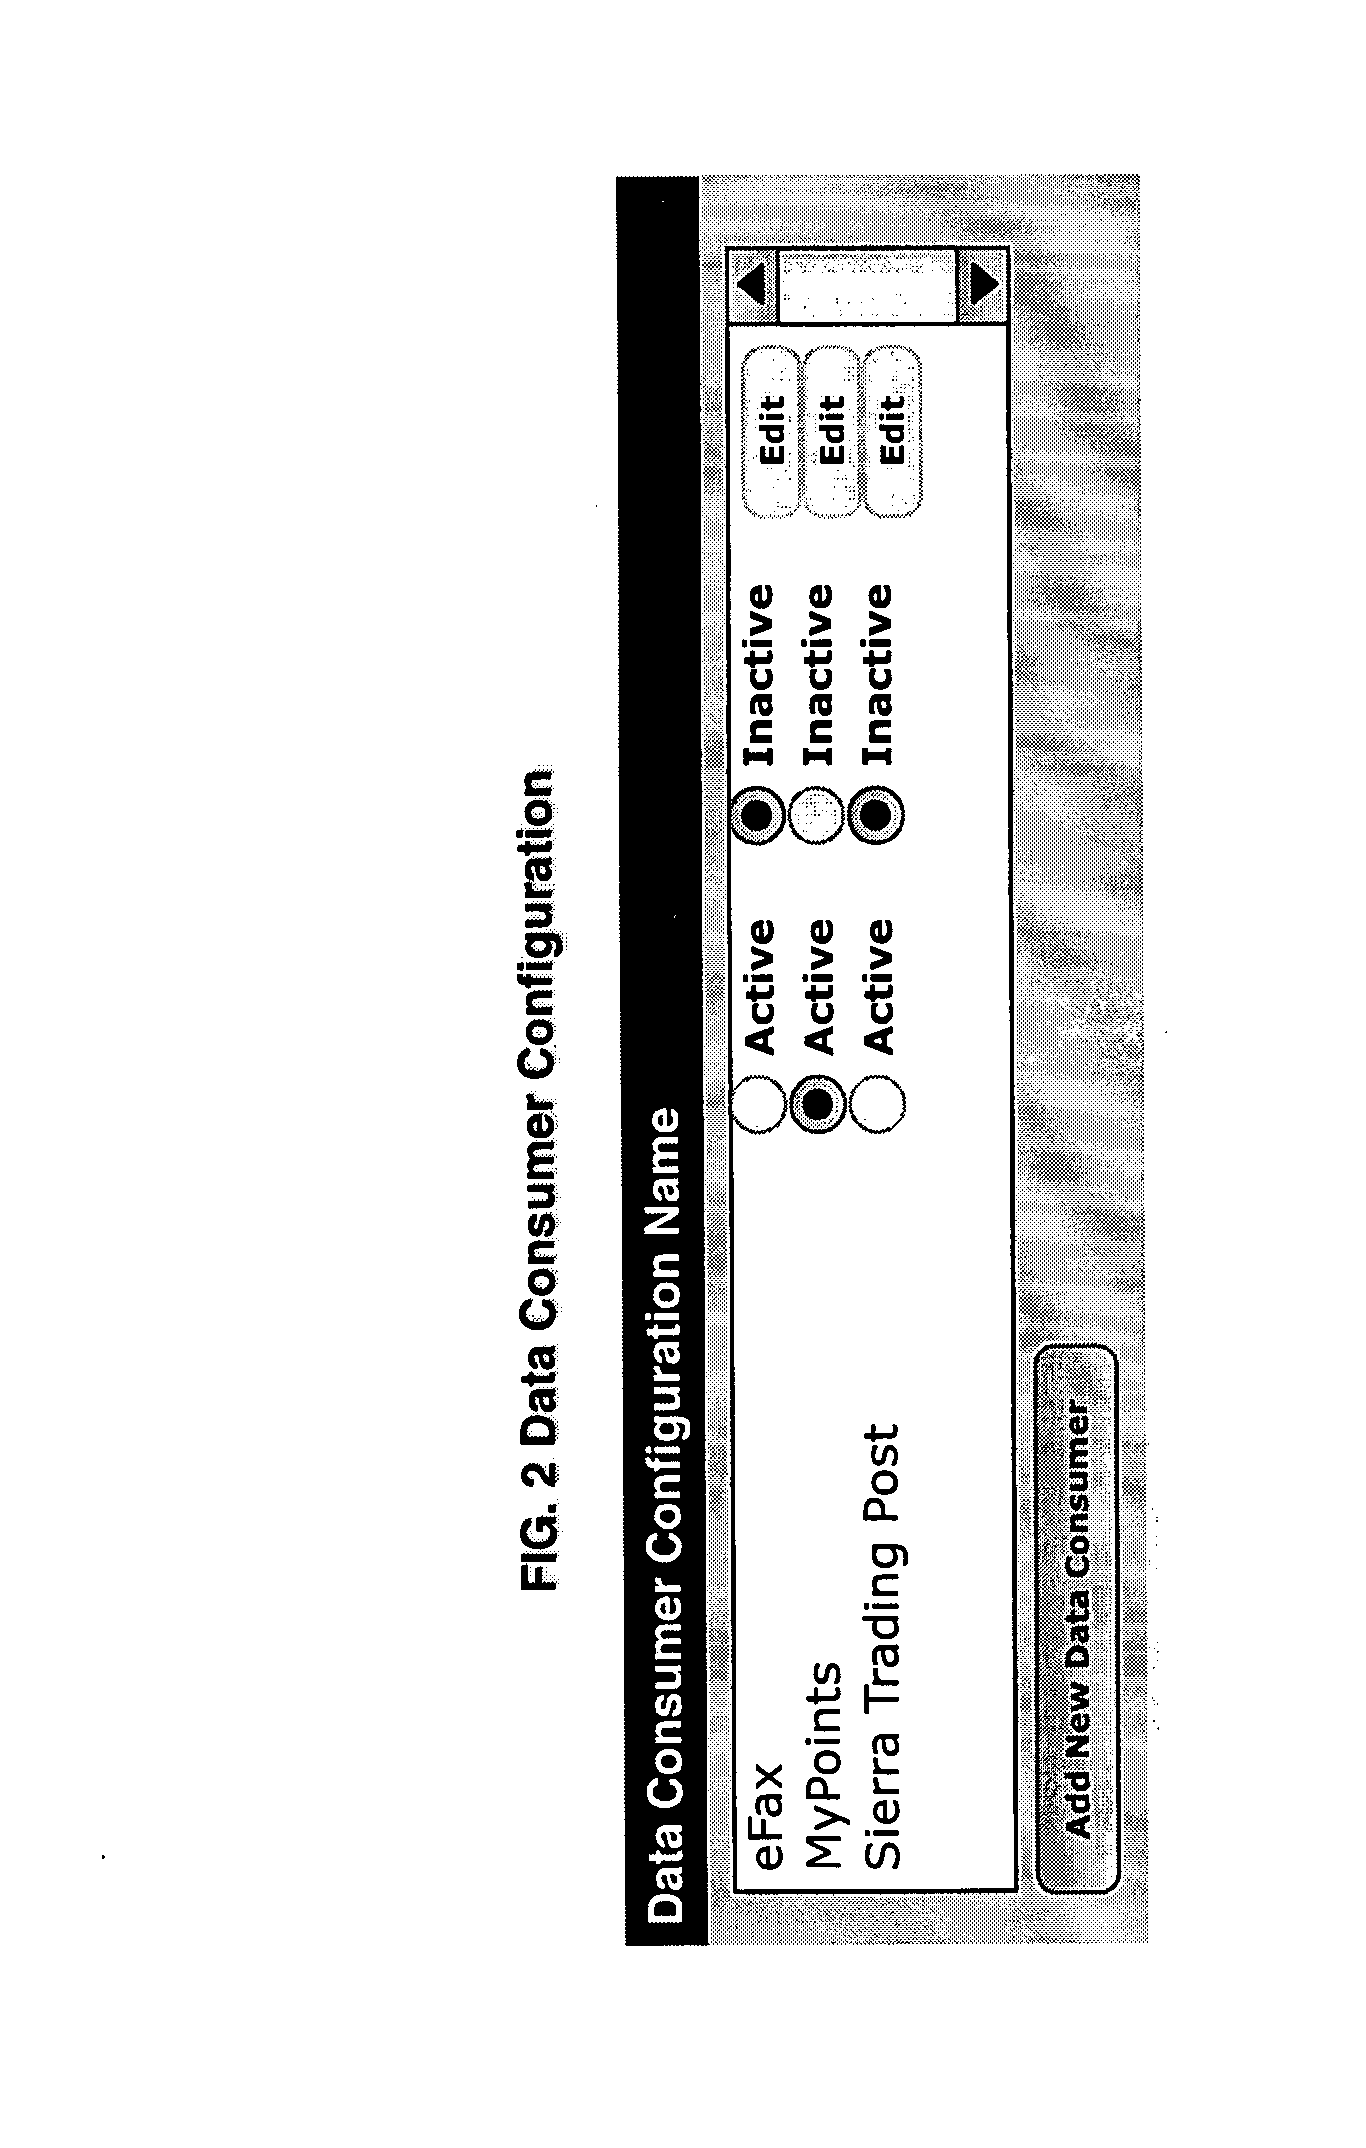 System and method for connecting and managing data transfers over the internet